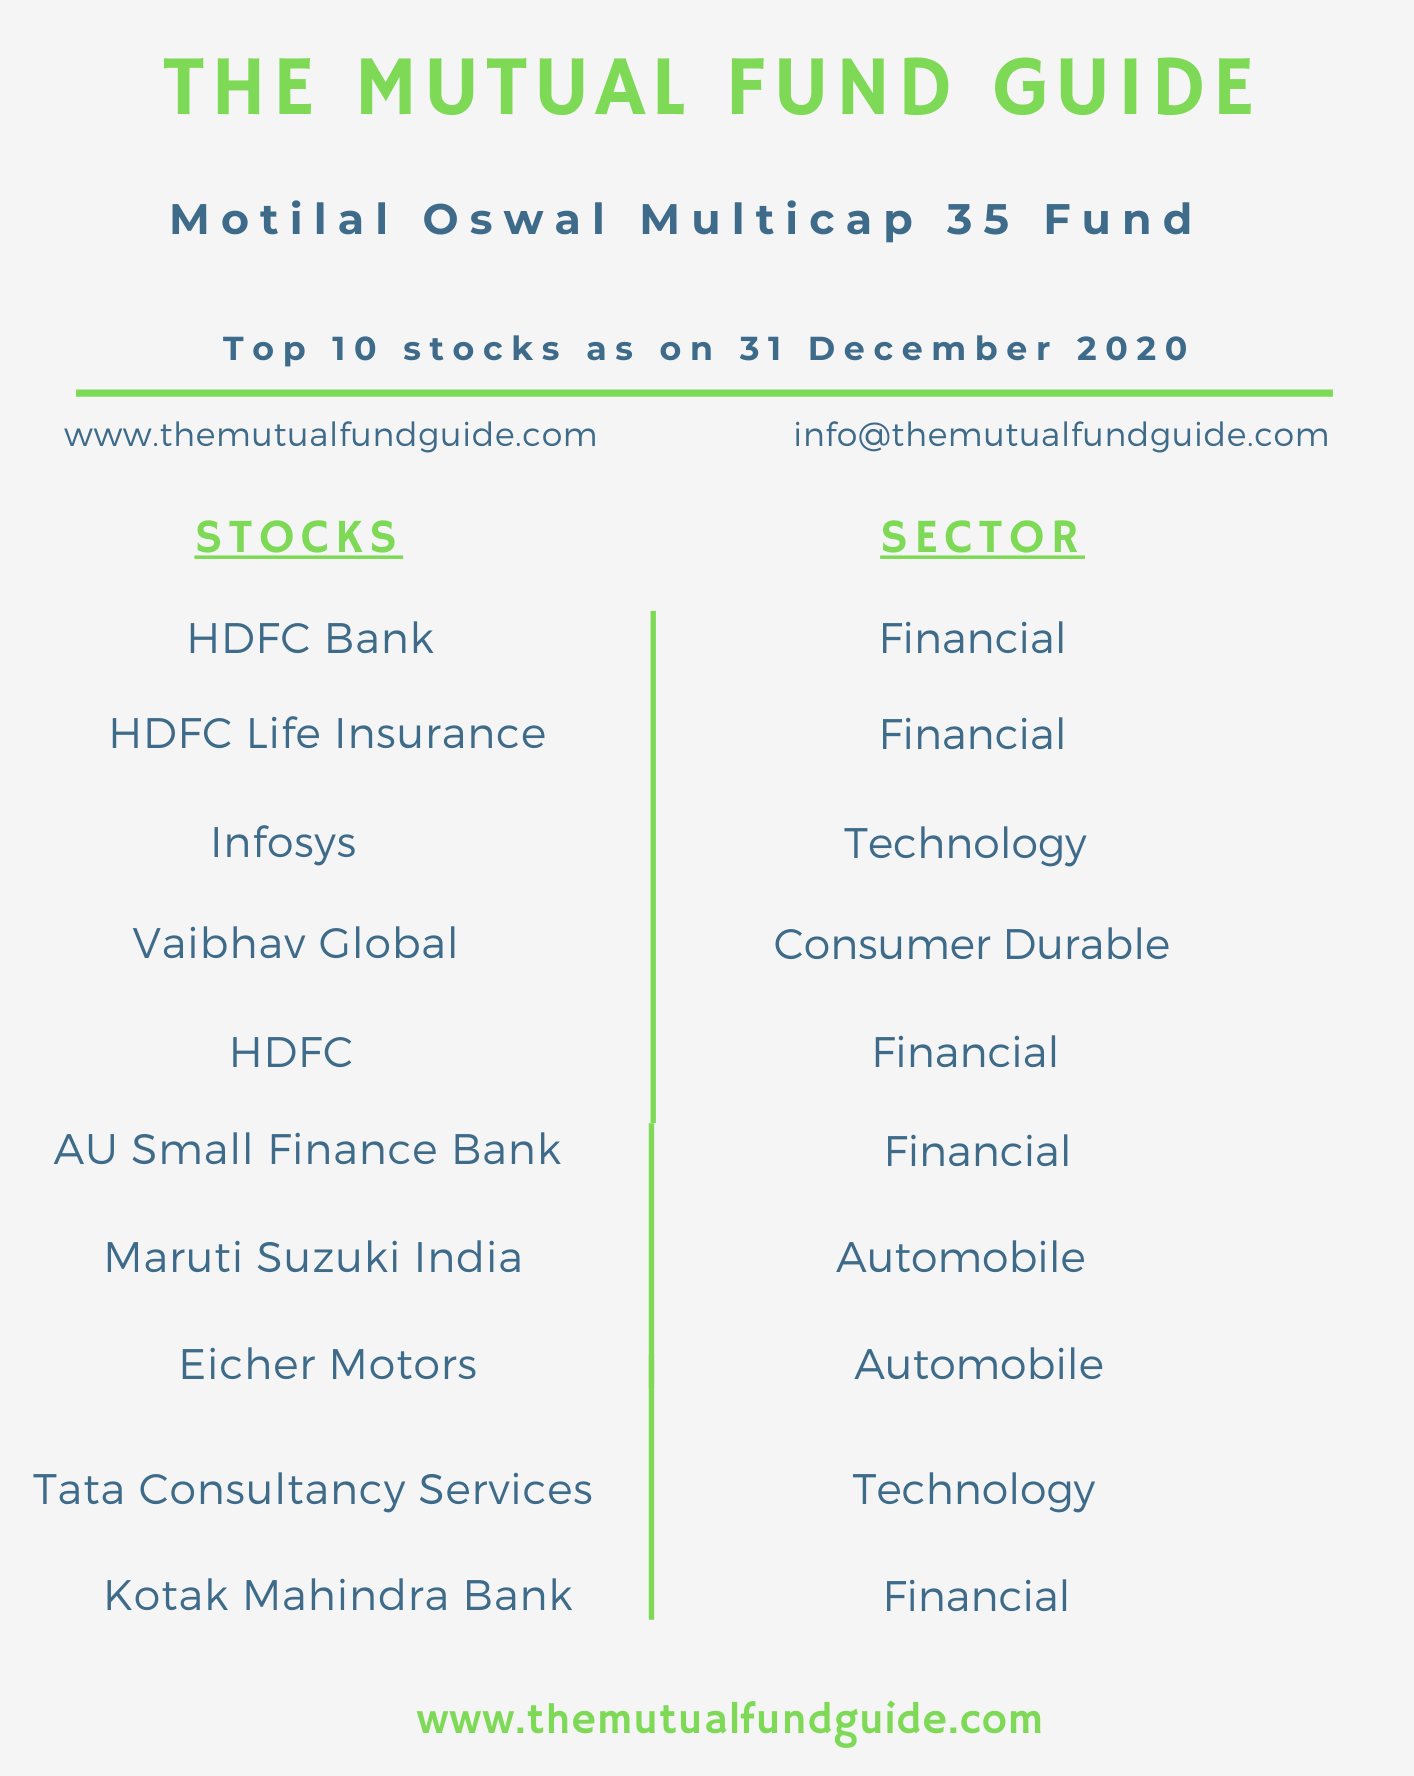 best mutual funds